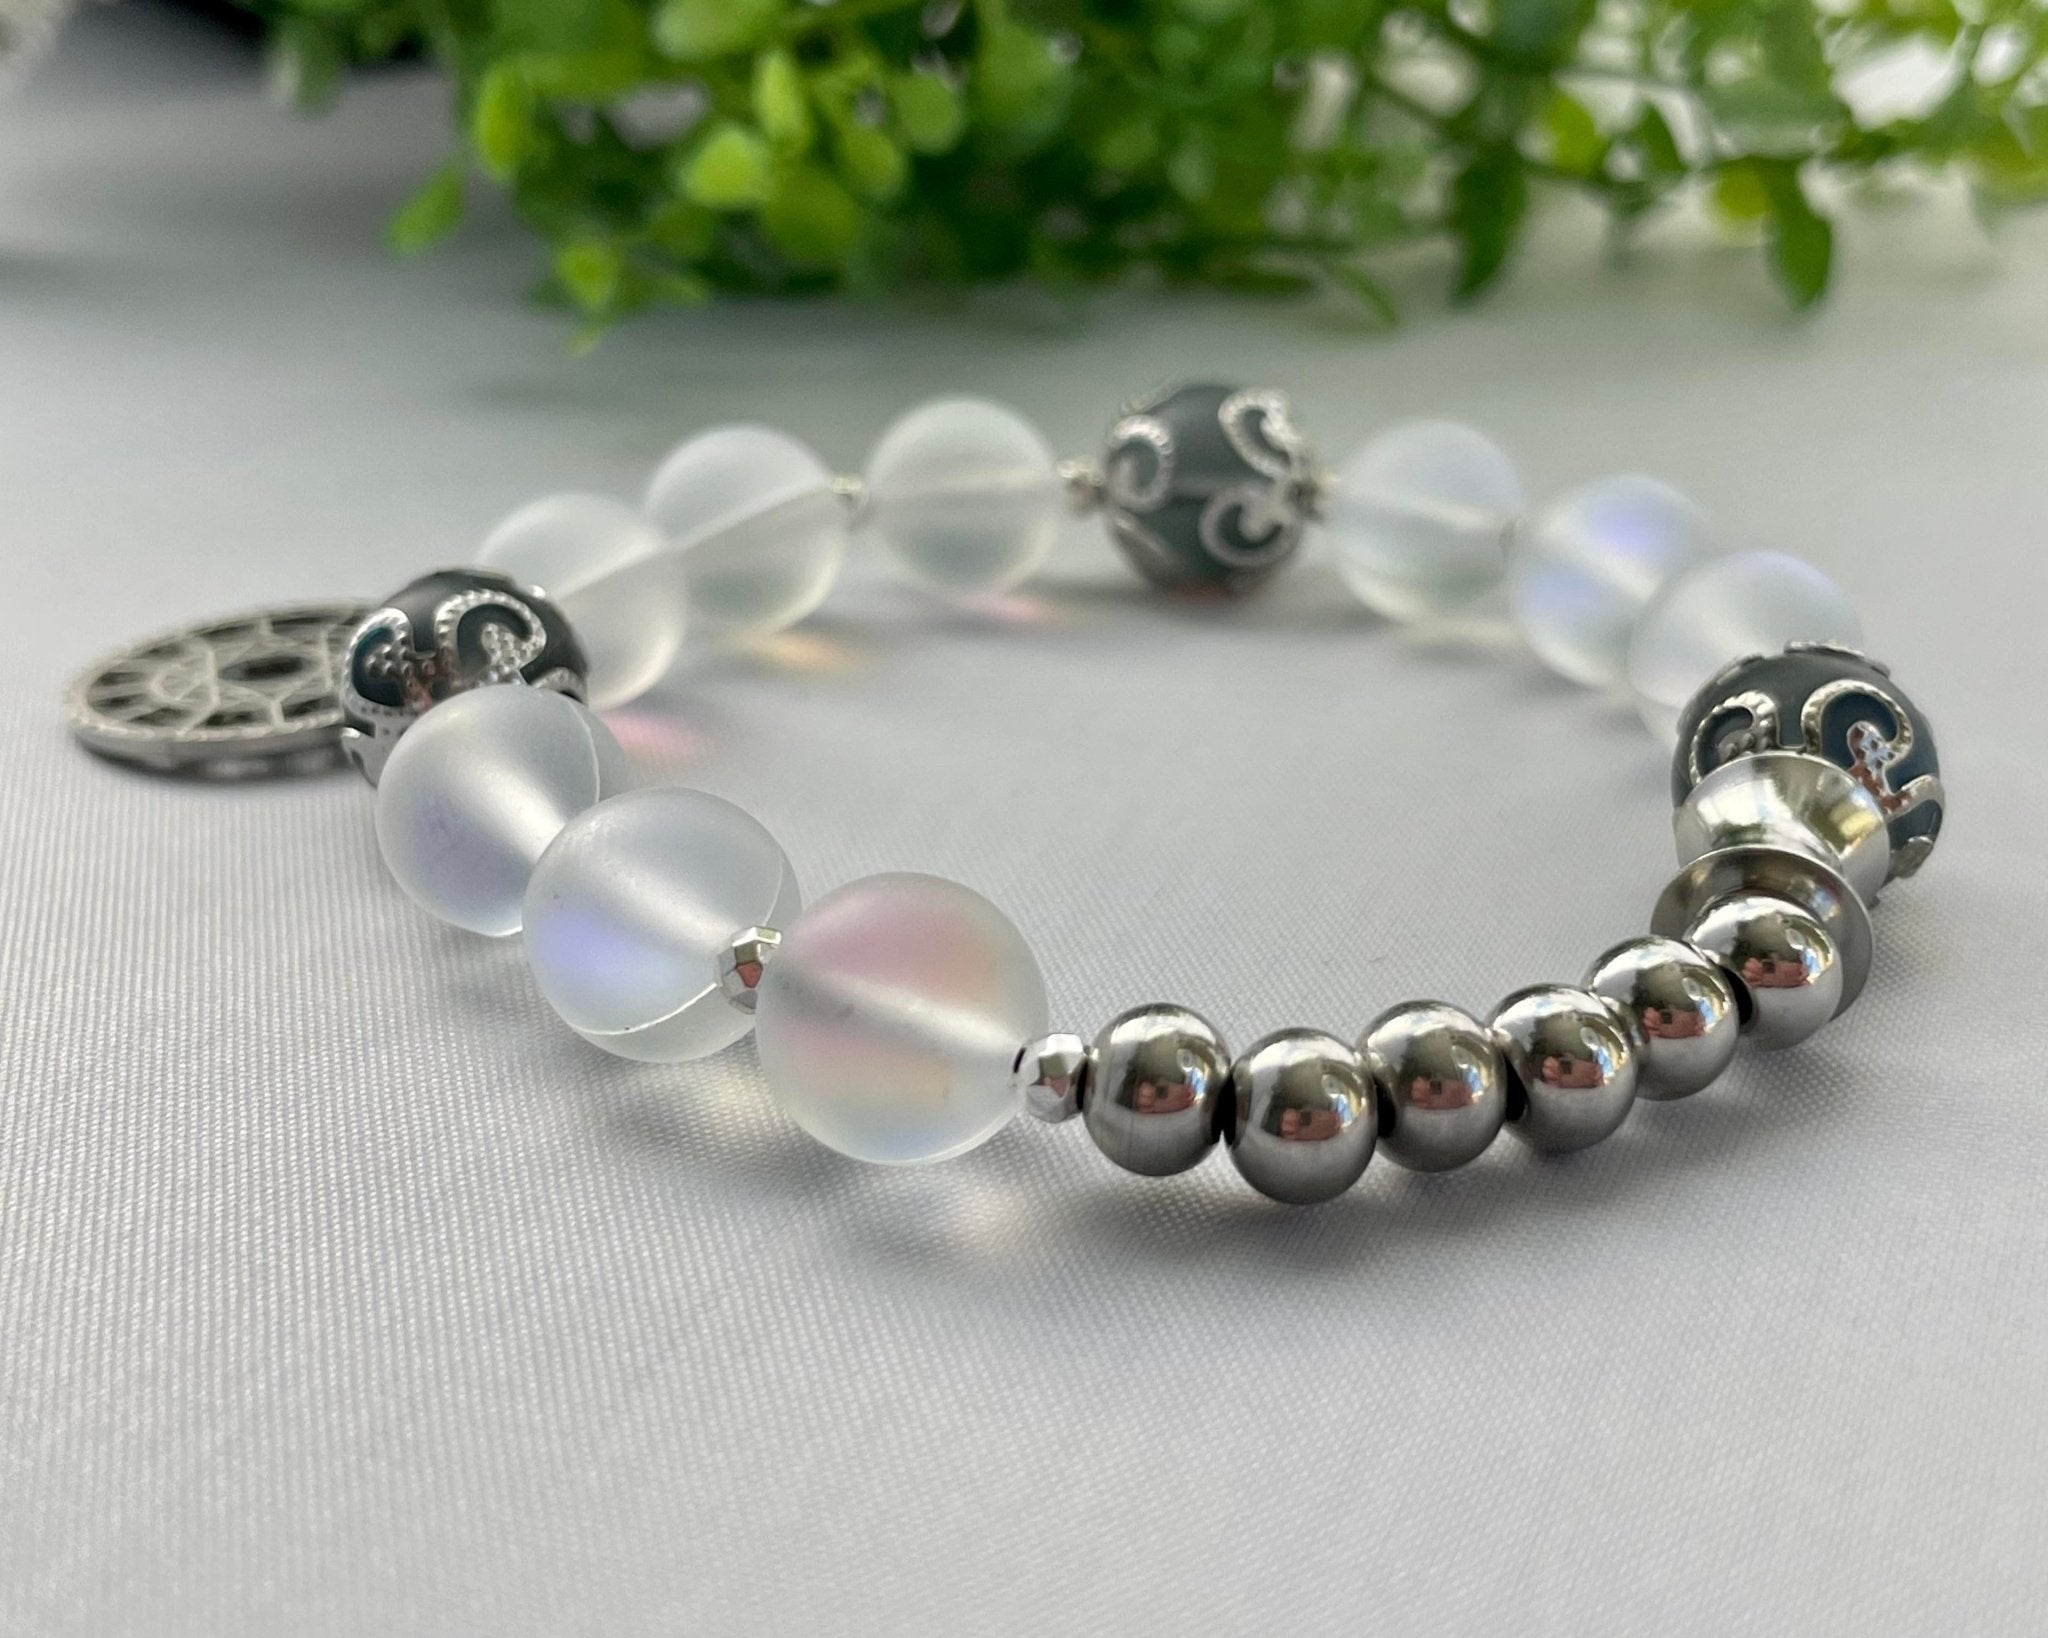 Angel Aura Quartz & Moonstone Stretchy Beaded Bracelet with Constellation Stainless Charm - CYR'S CREATIONS